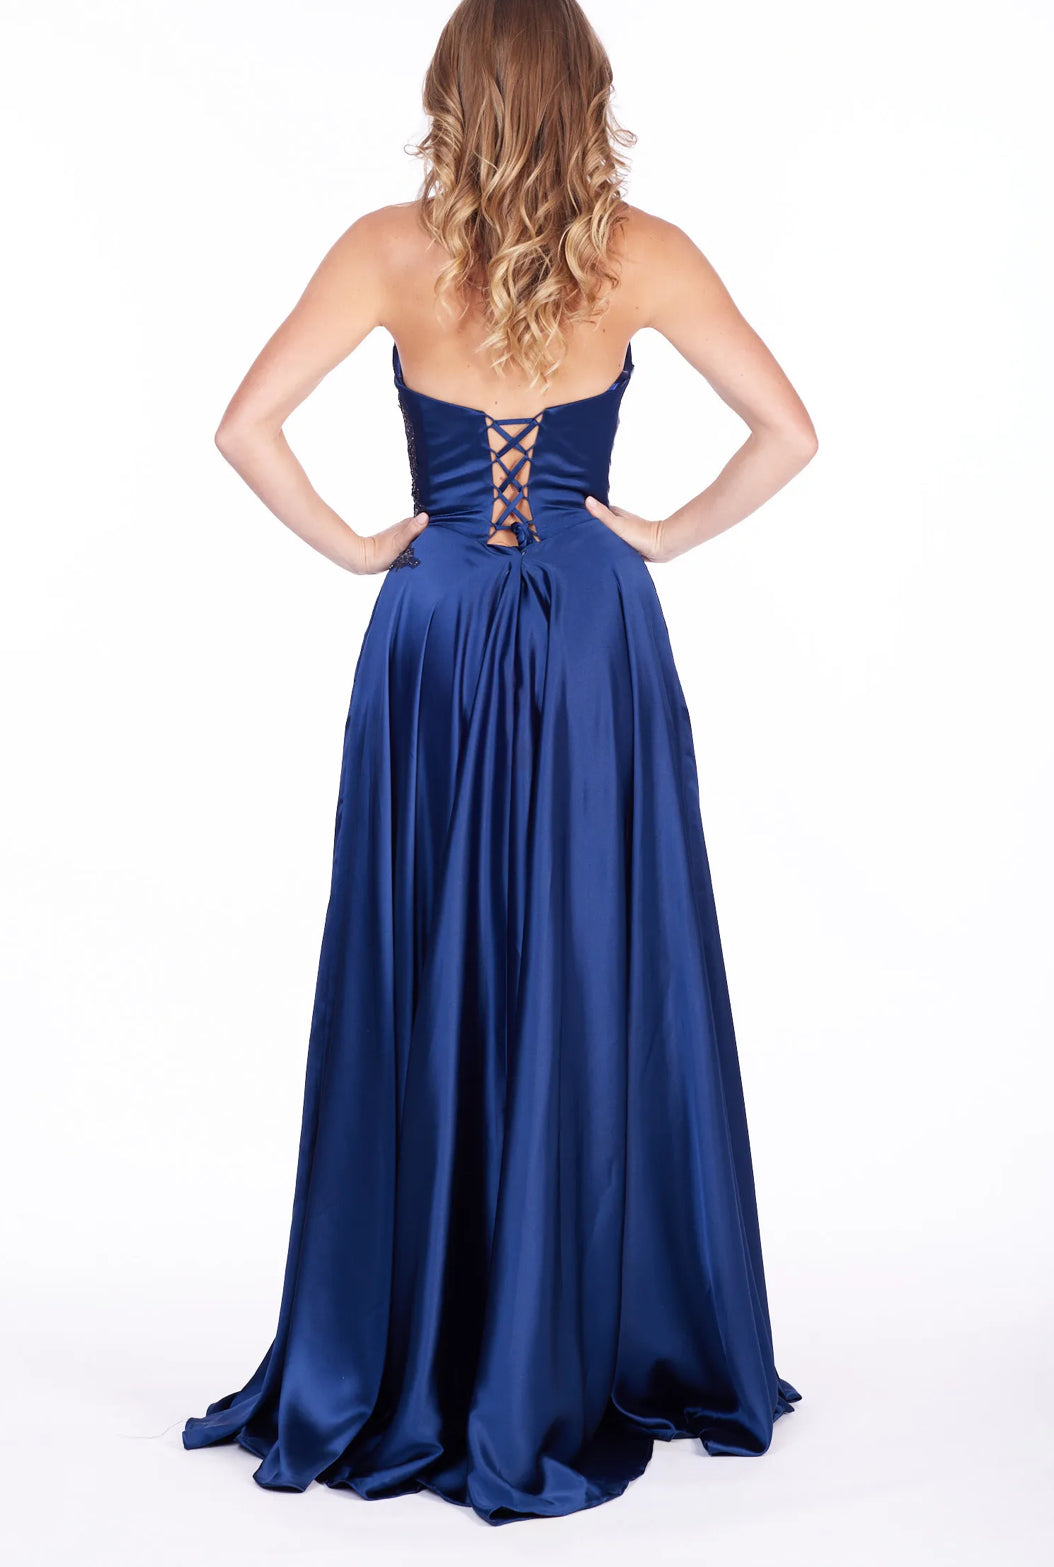 Prom Dress - Claire